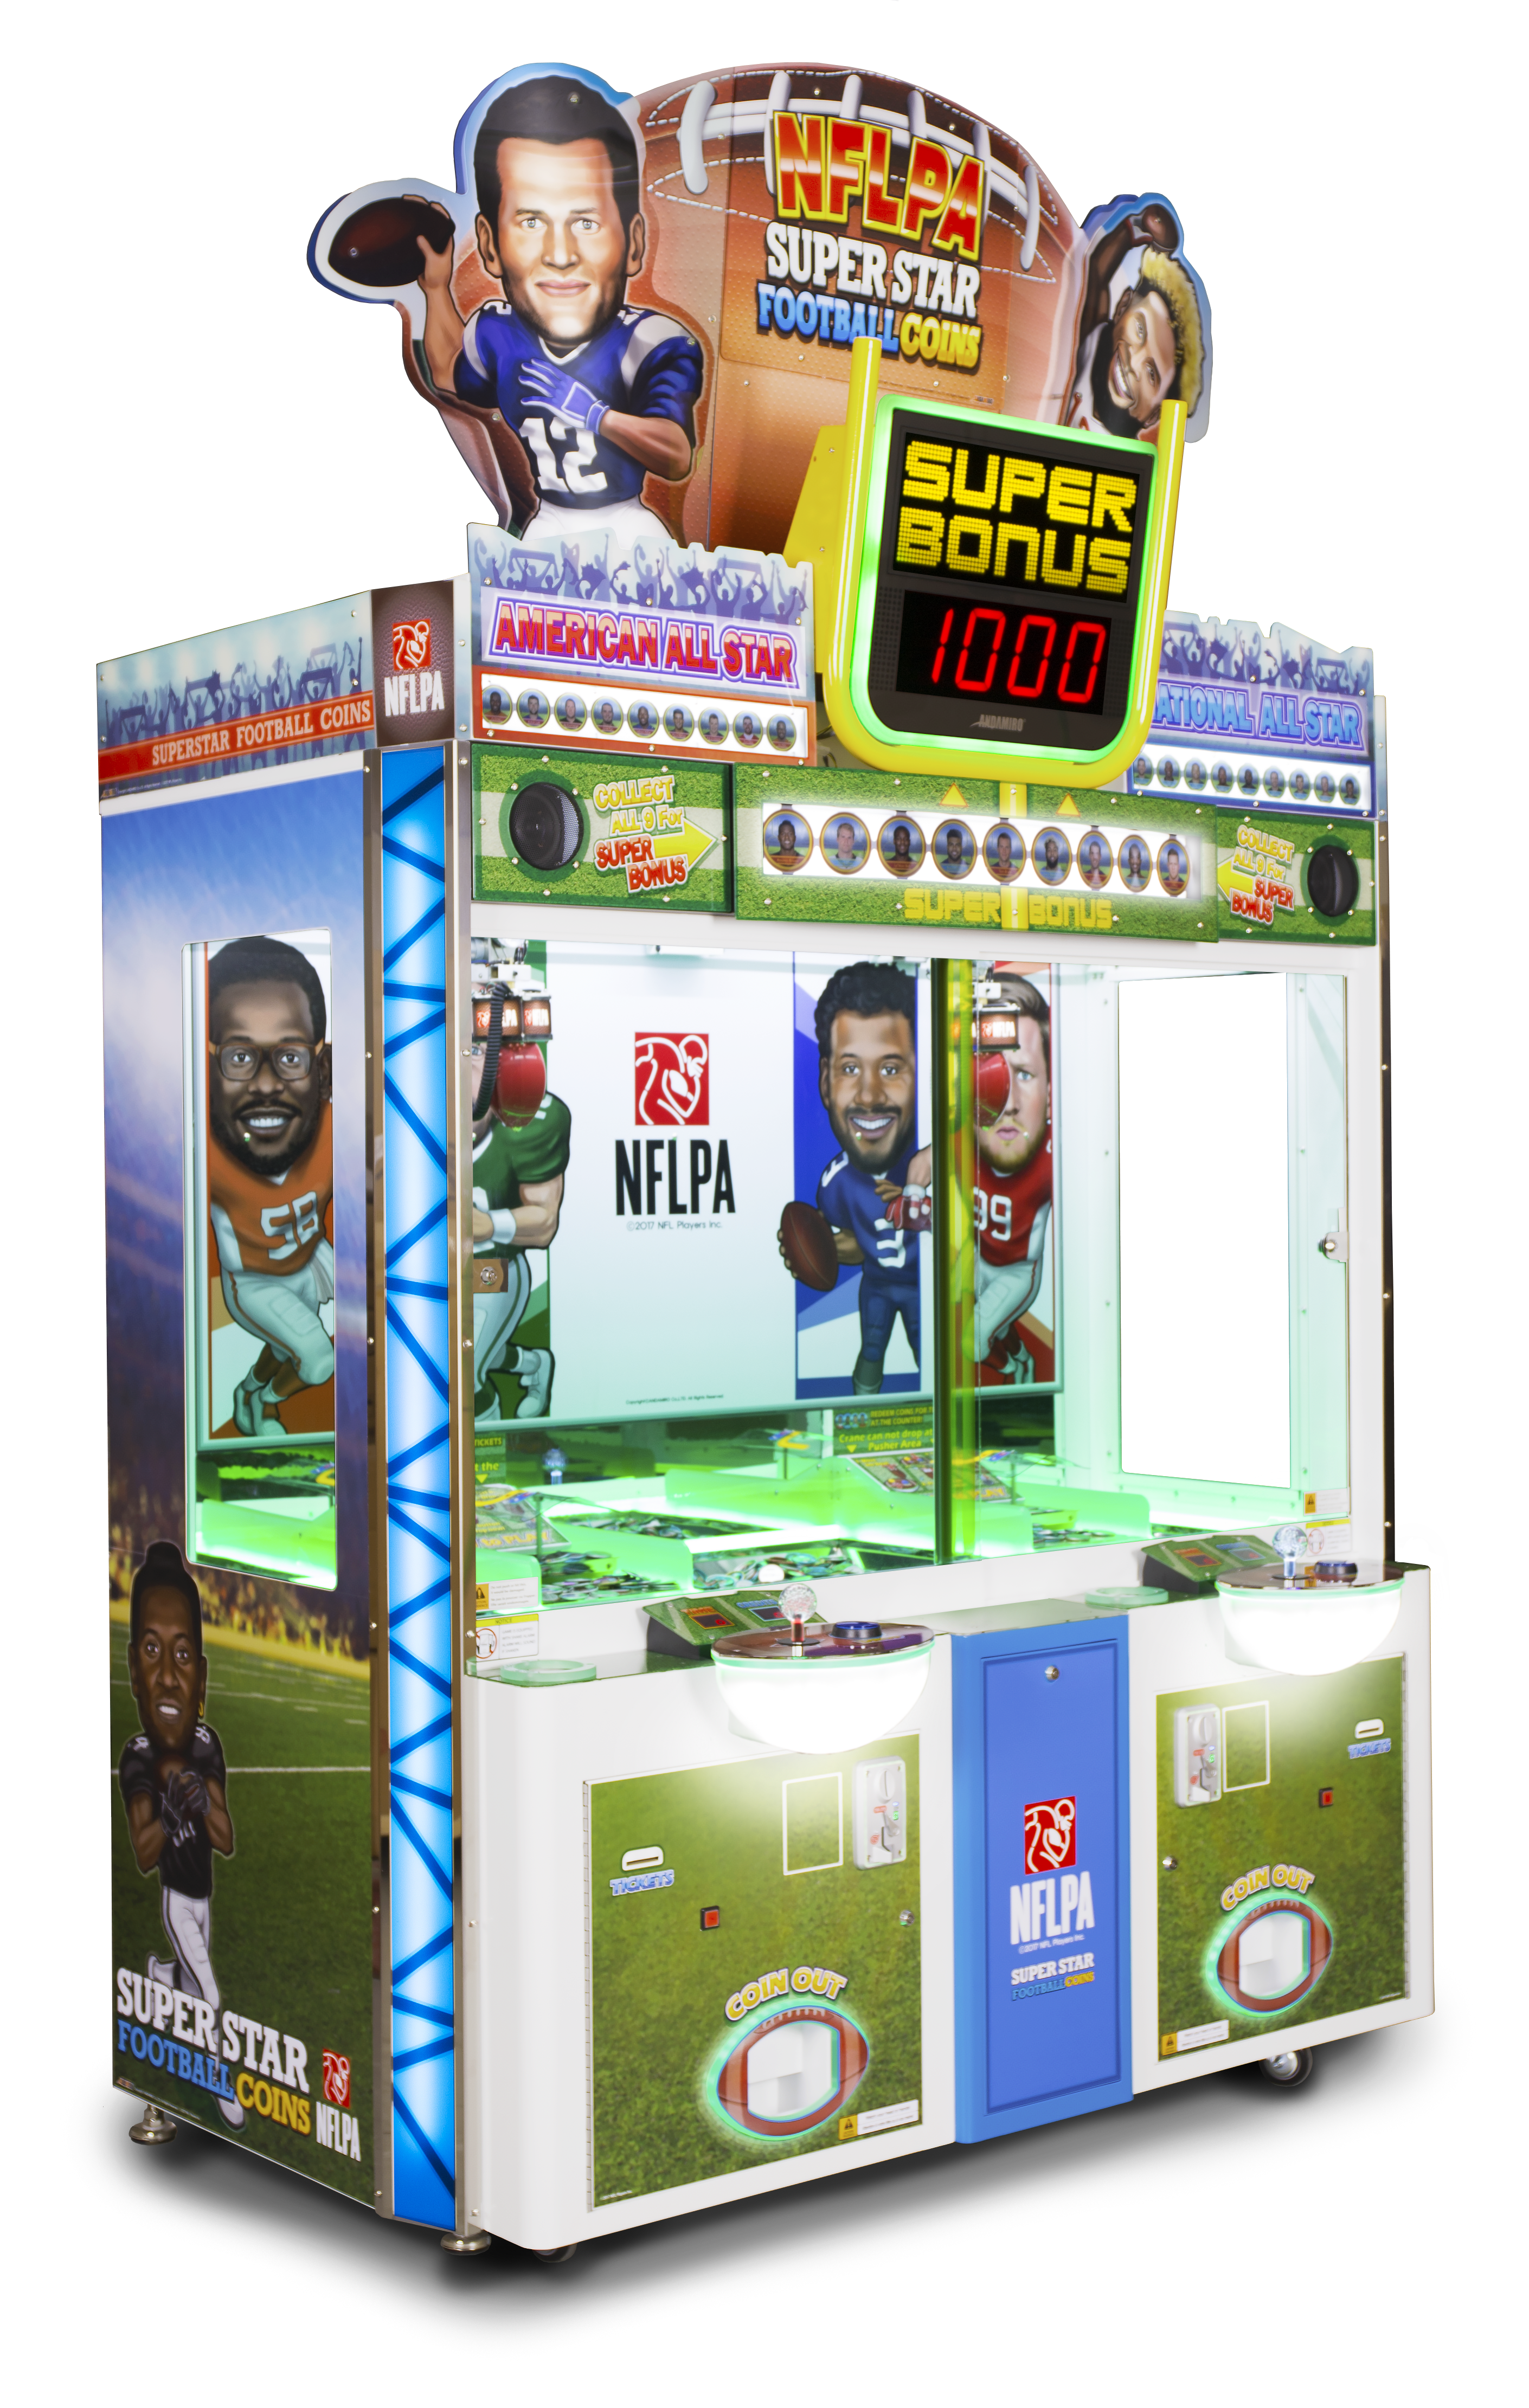 Nflpa Superstar fooball coins Pic Left